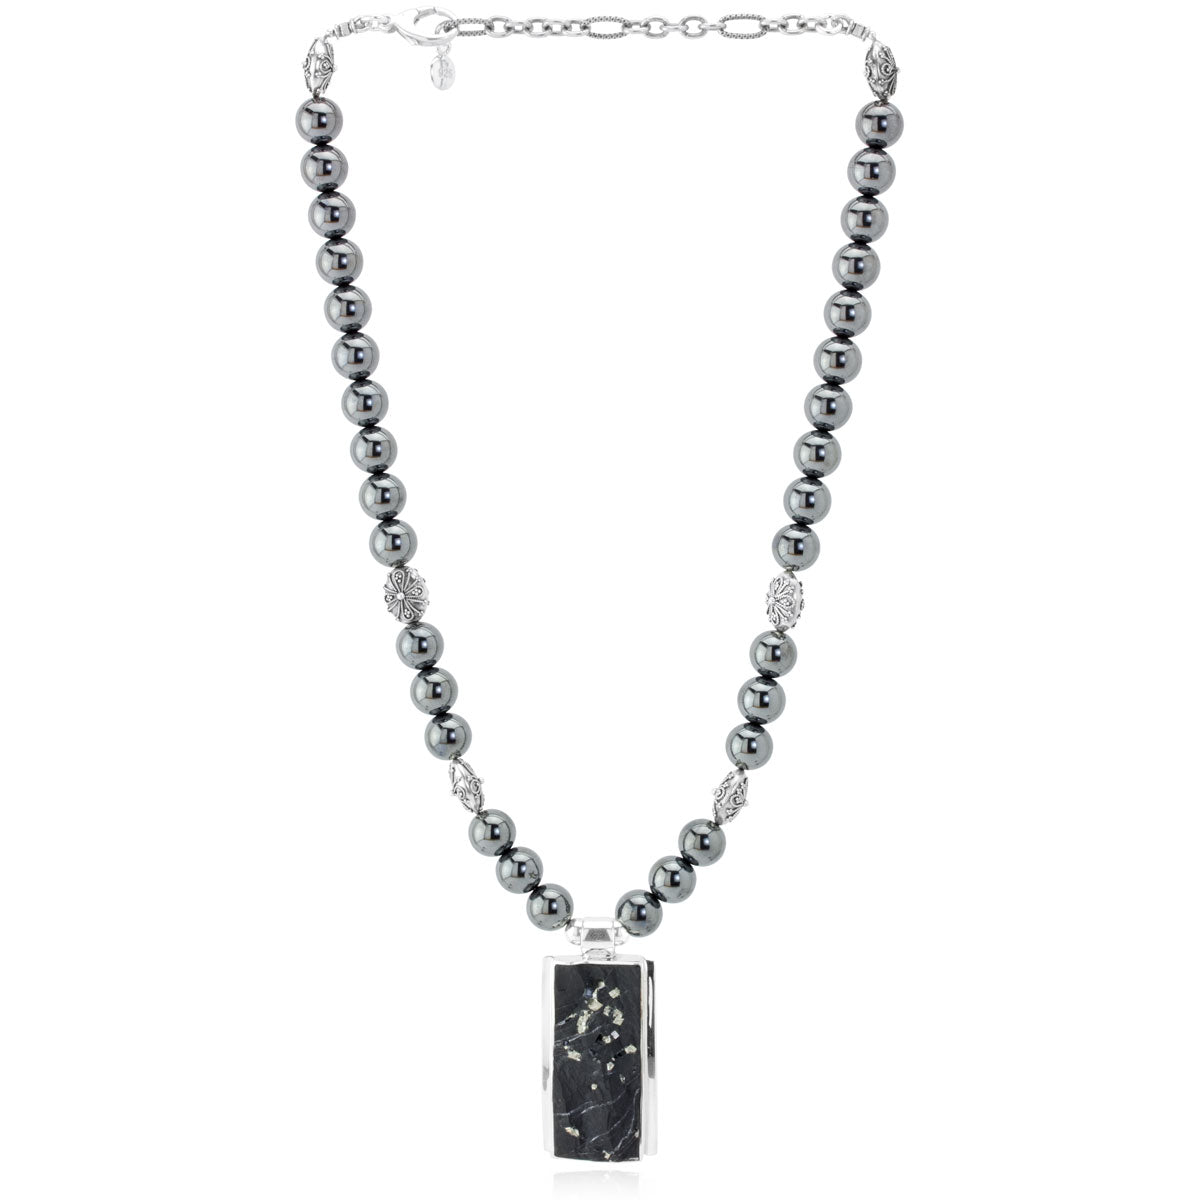 The Goddess Collection Hematite Necklace